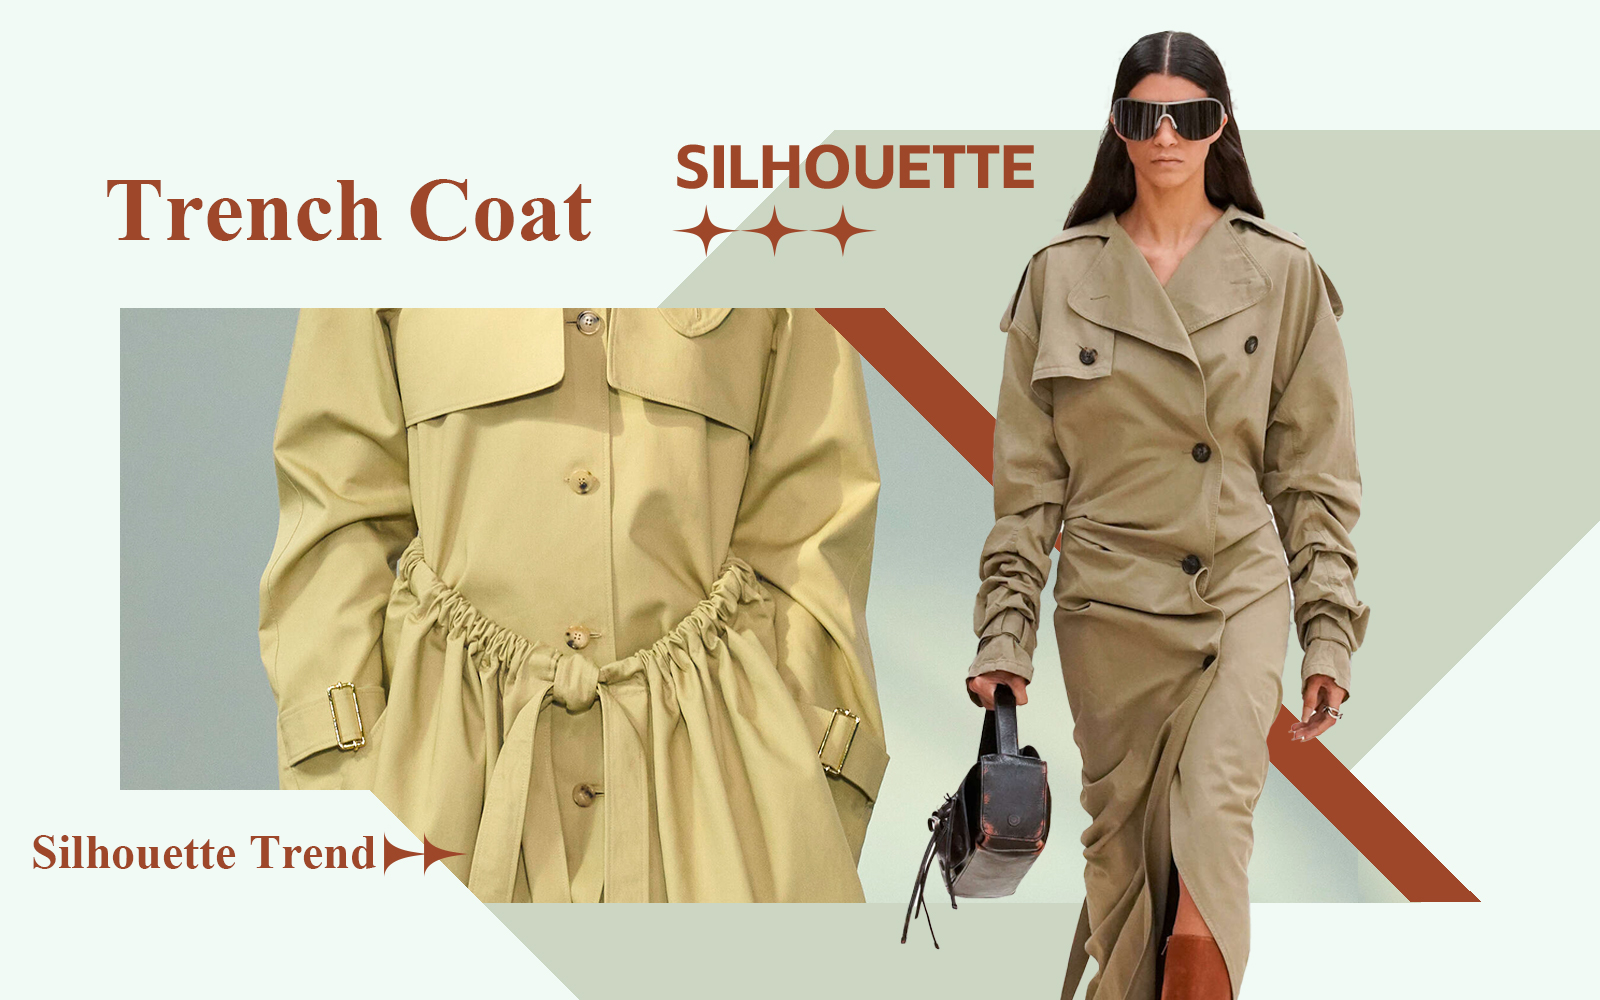 New Commuter -- The Silhouette Trend for Women's Trench Coat